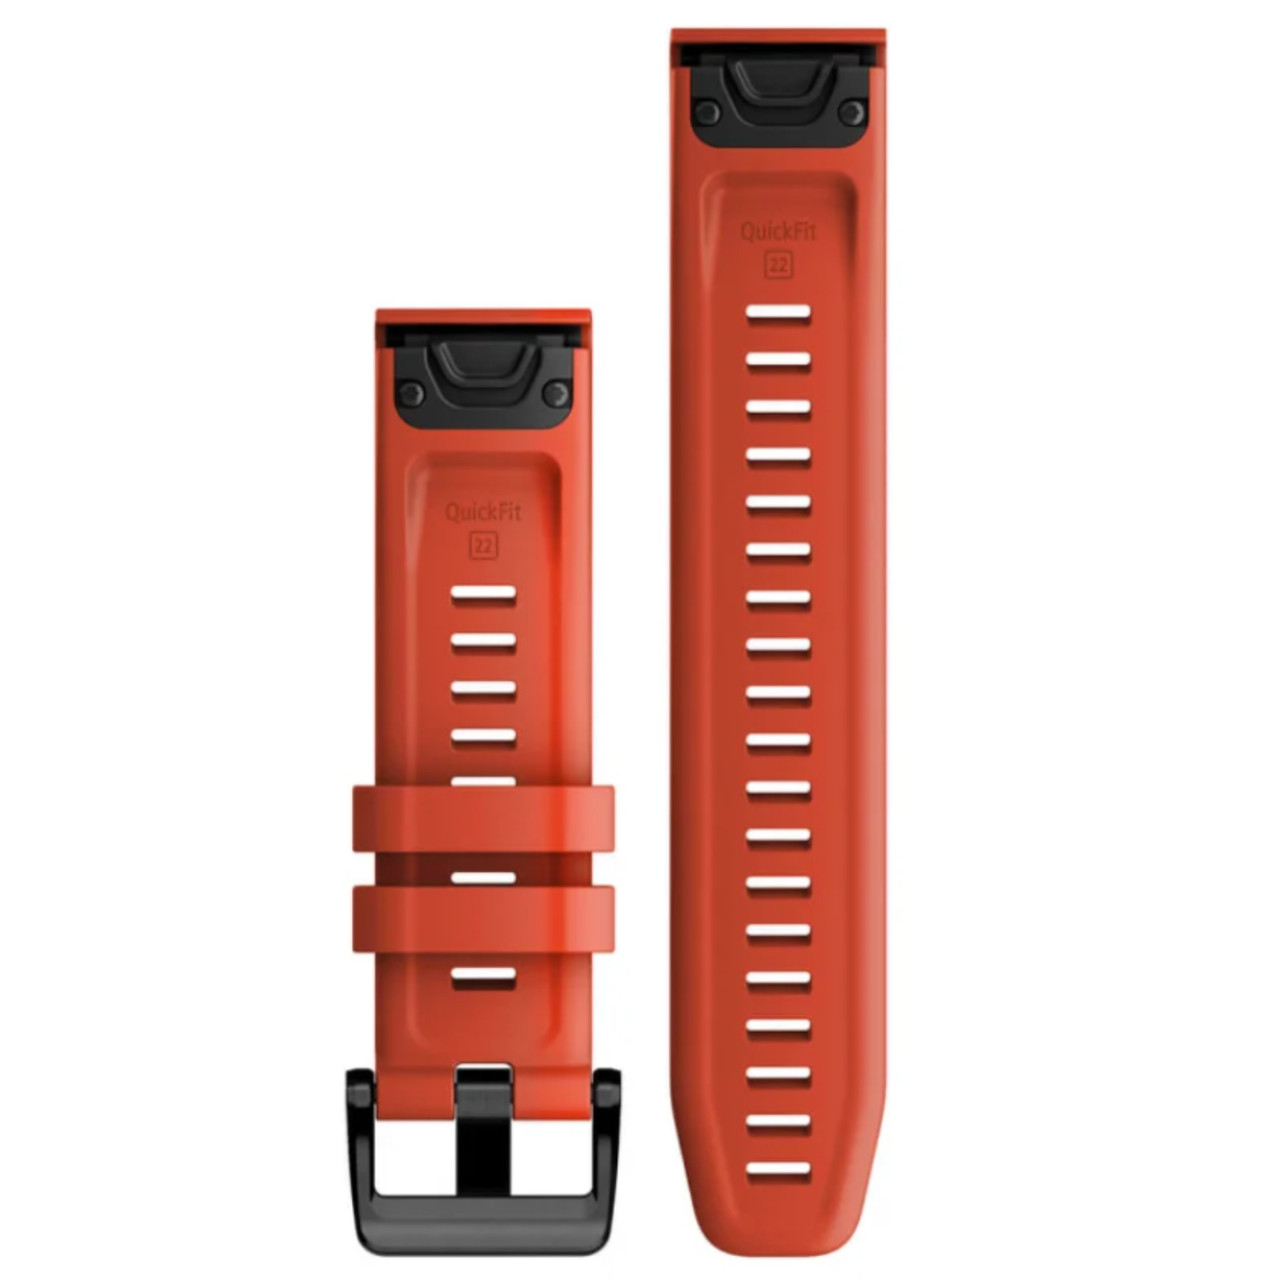 Garmin New OEM QuickFit® 22 Watch Bands Flame Red Silicone, 010-13111-04